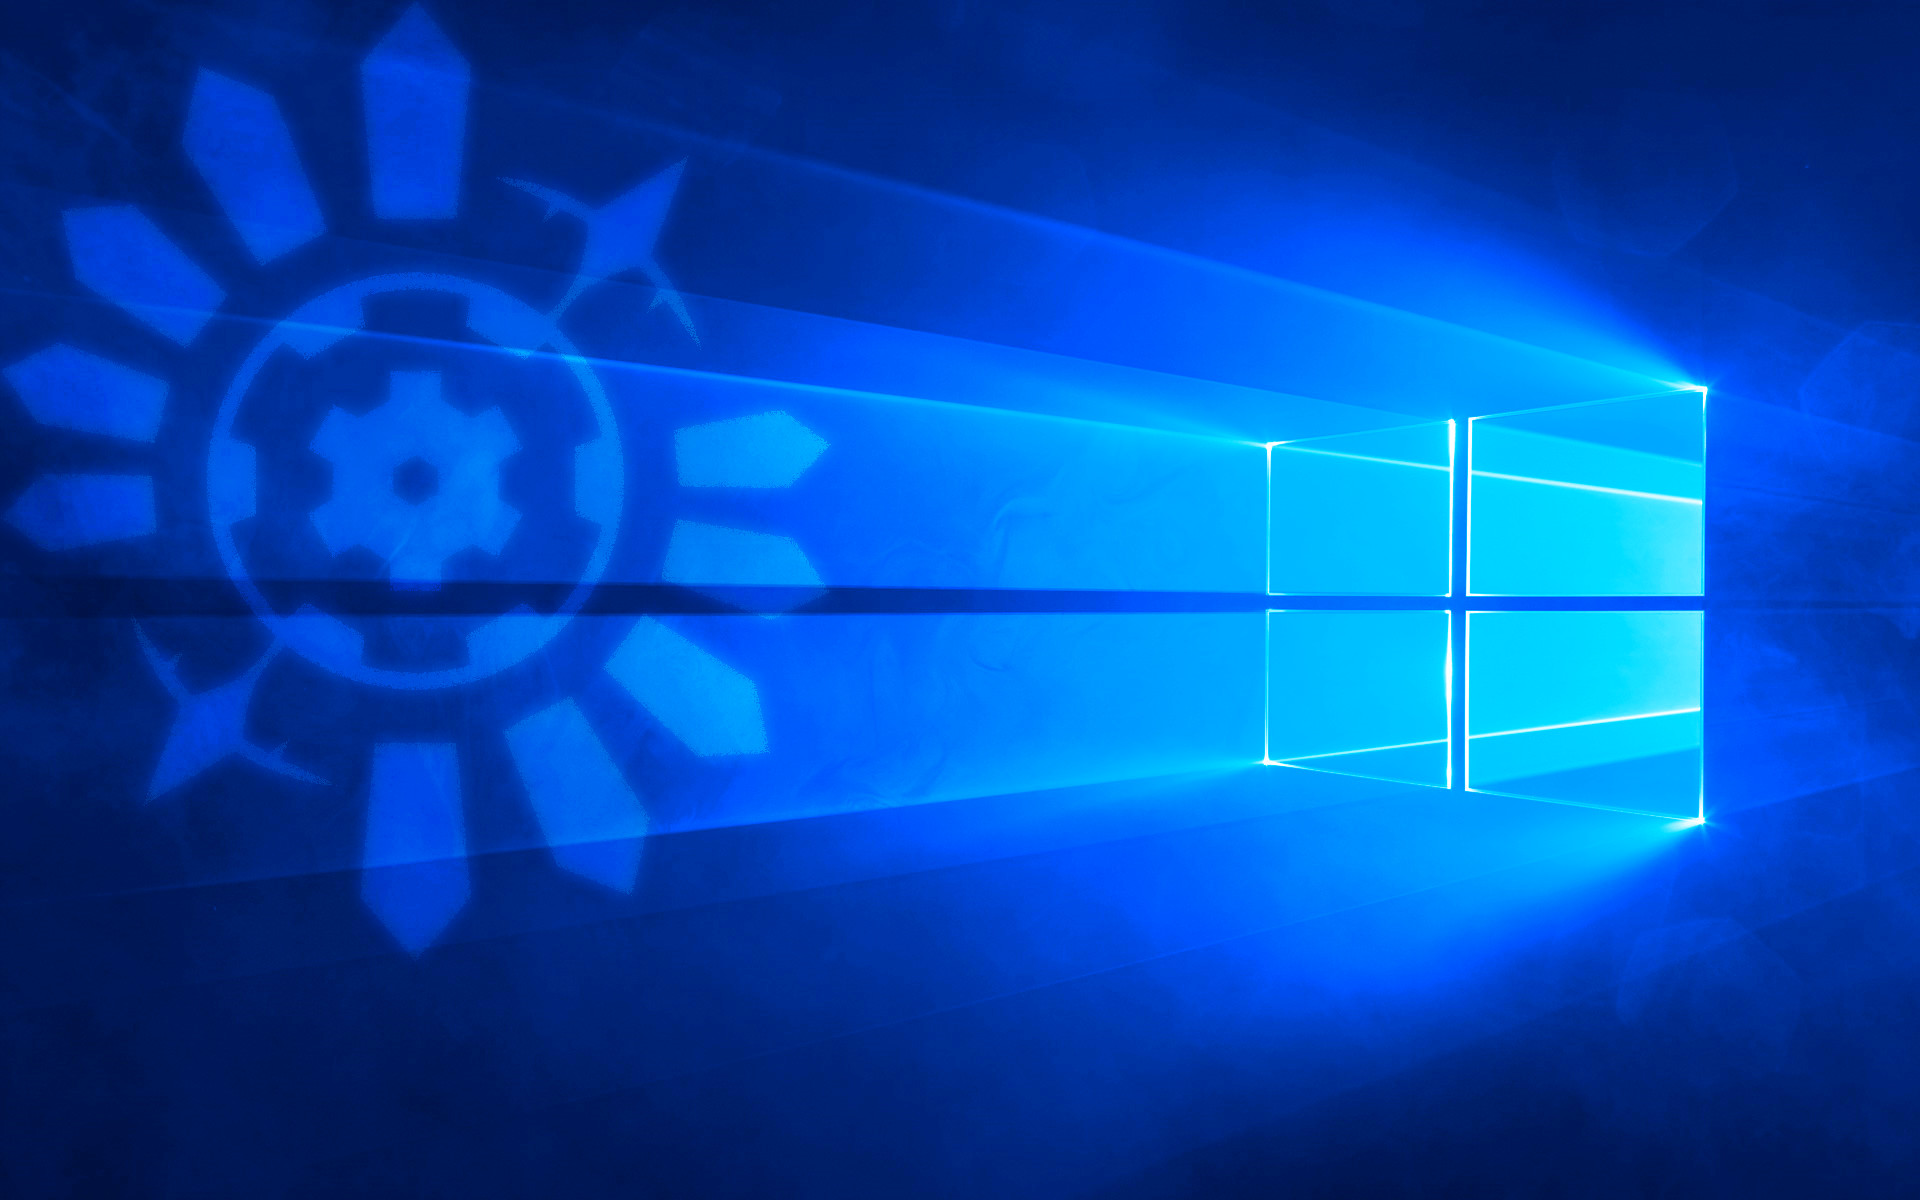 The windows 10 Wallpaper with a transparent Time Gear from Pokmon Mystery Dungeon Explorers of Time / Darkness / Sky and the Windows 10 Wallpaper is a bit